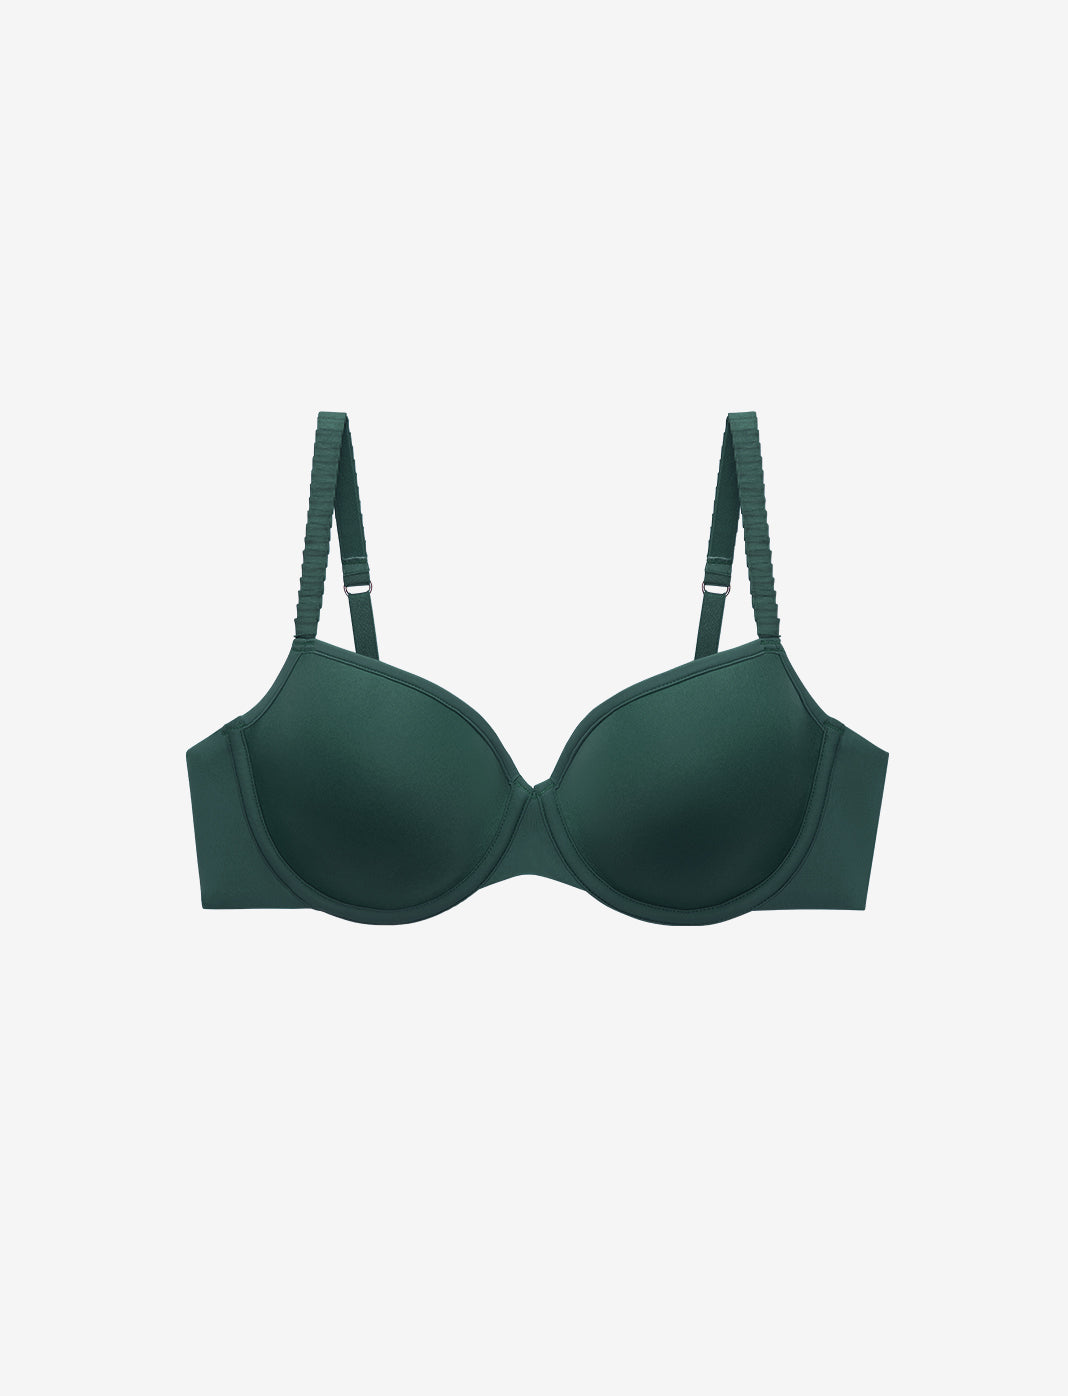 ThirdLove's Best-Selling T-Shirt Bra Is Now Available in 78 Sizes